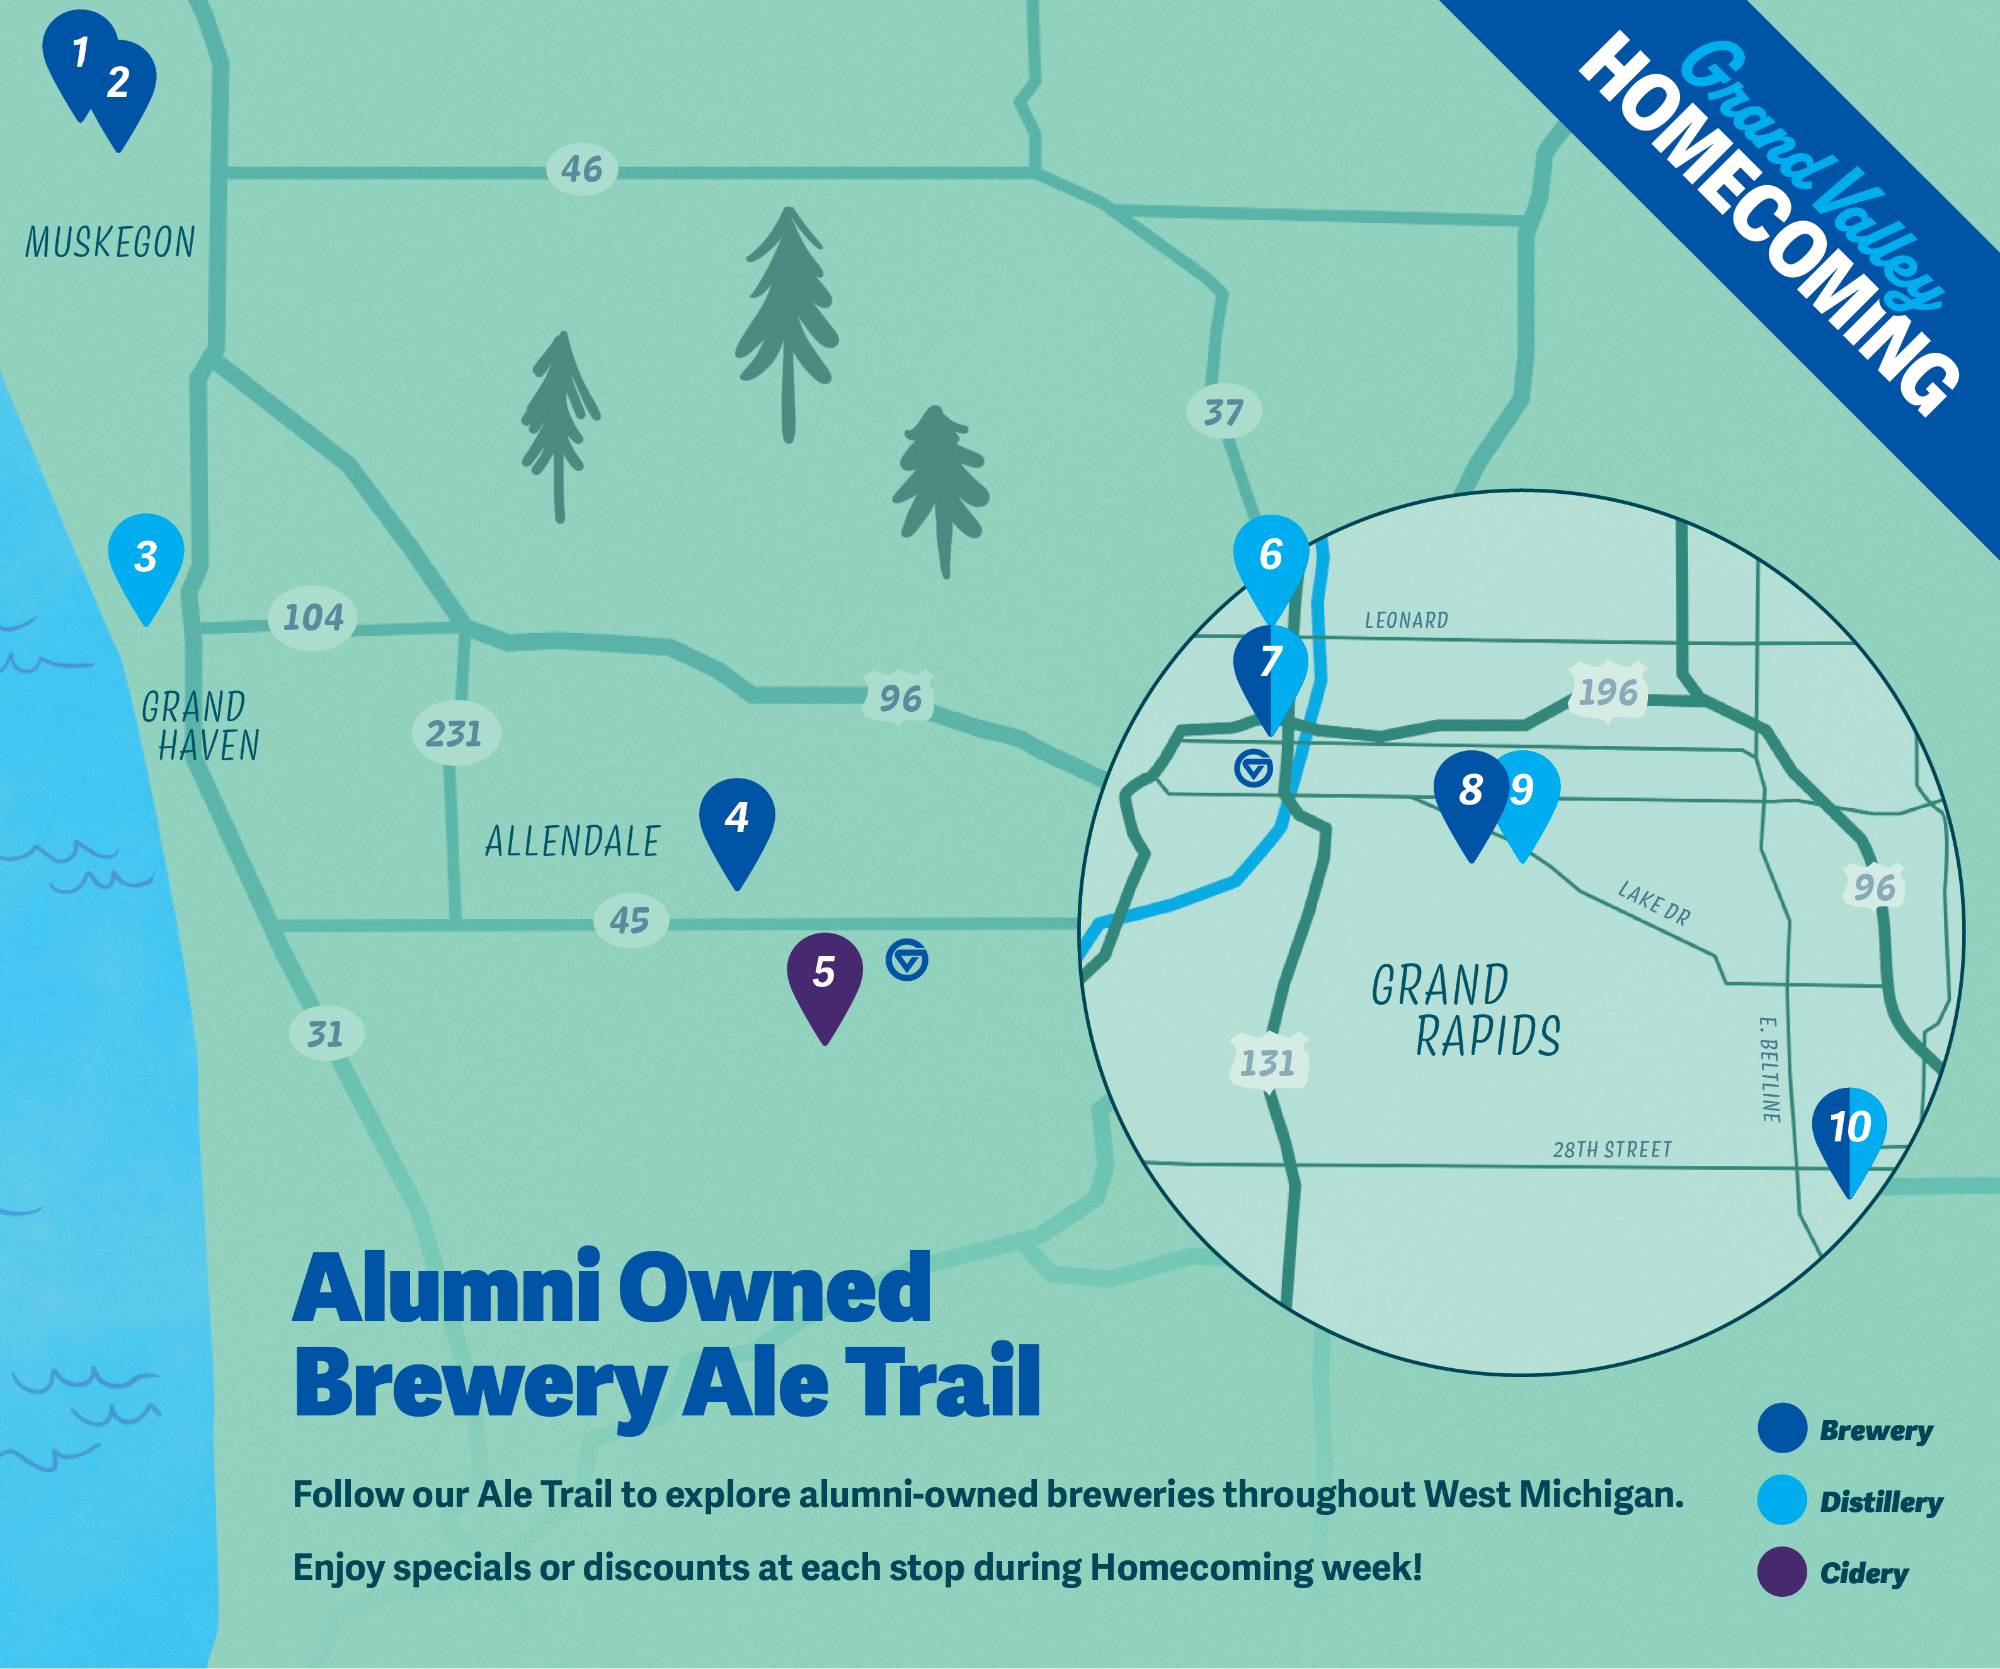 Follow our Ale Trail to explore alumni-owned breweries throughout West Michigan. Enjoy specials or discounts at each spot during Homecoming week!